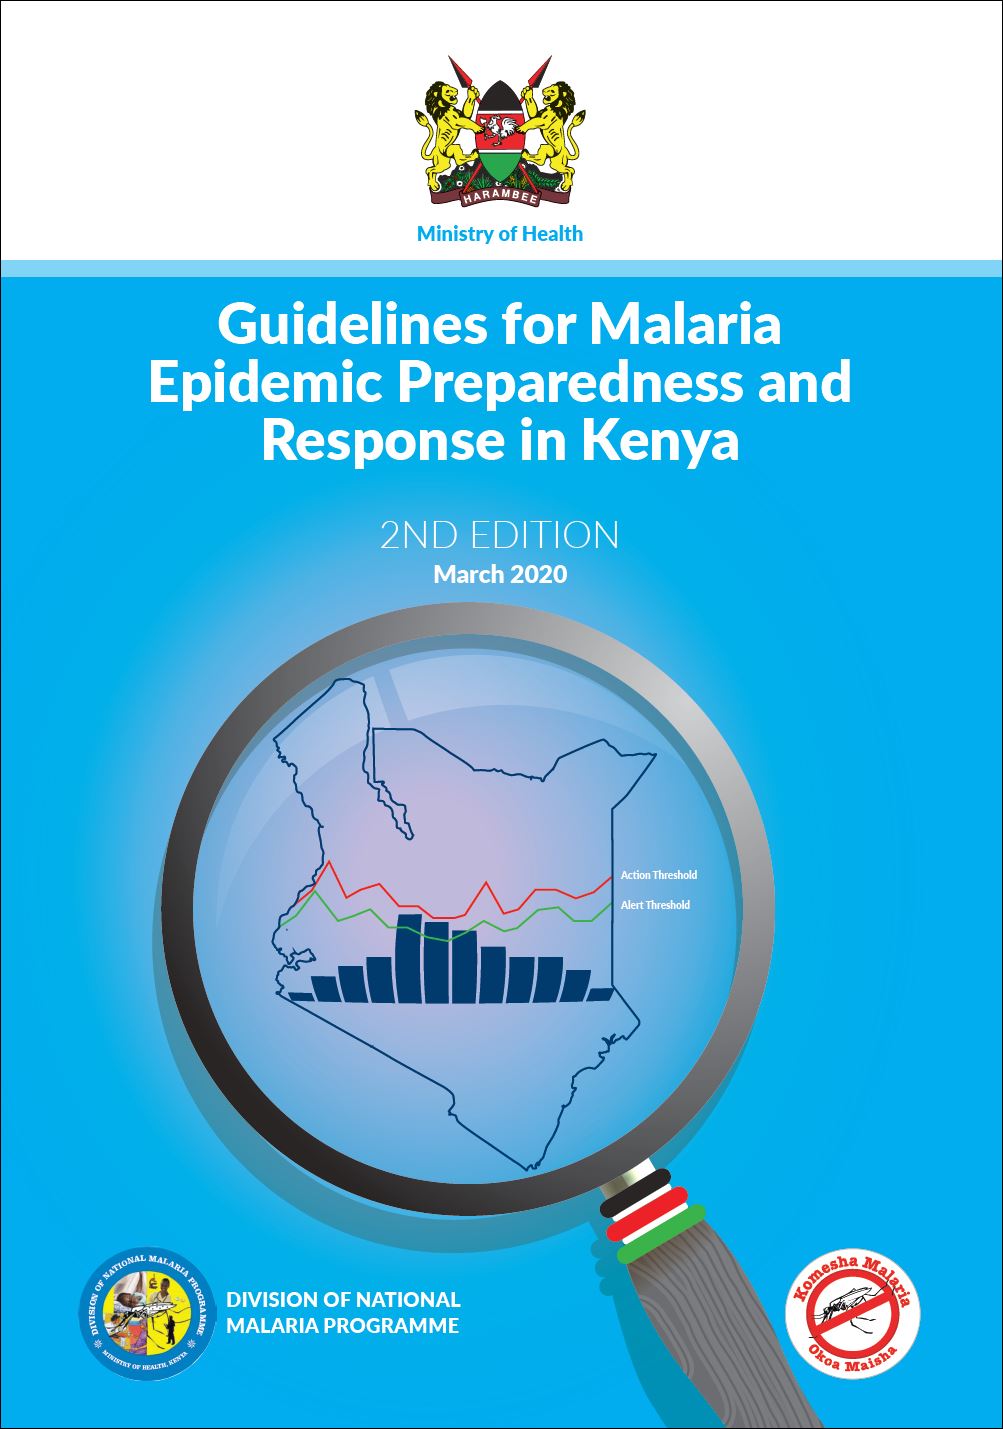 Guidelines for Malaria Epidemic Preparedness and Response in Kenya: 2nd Edition